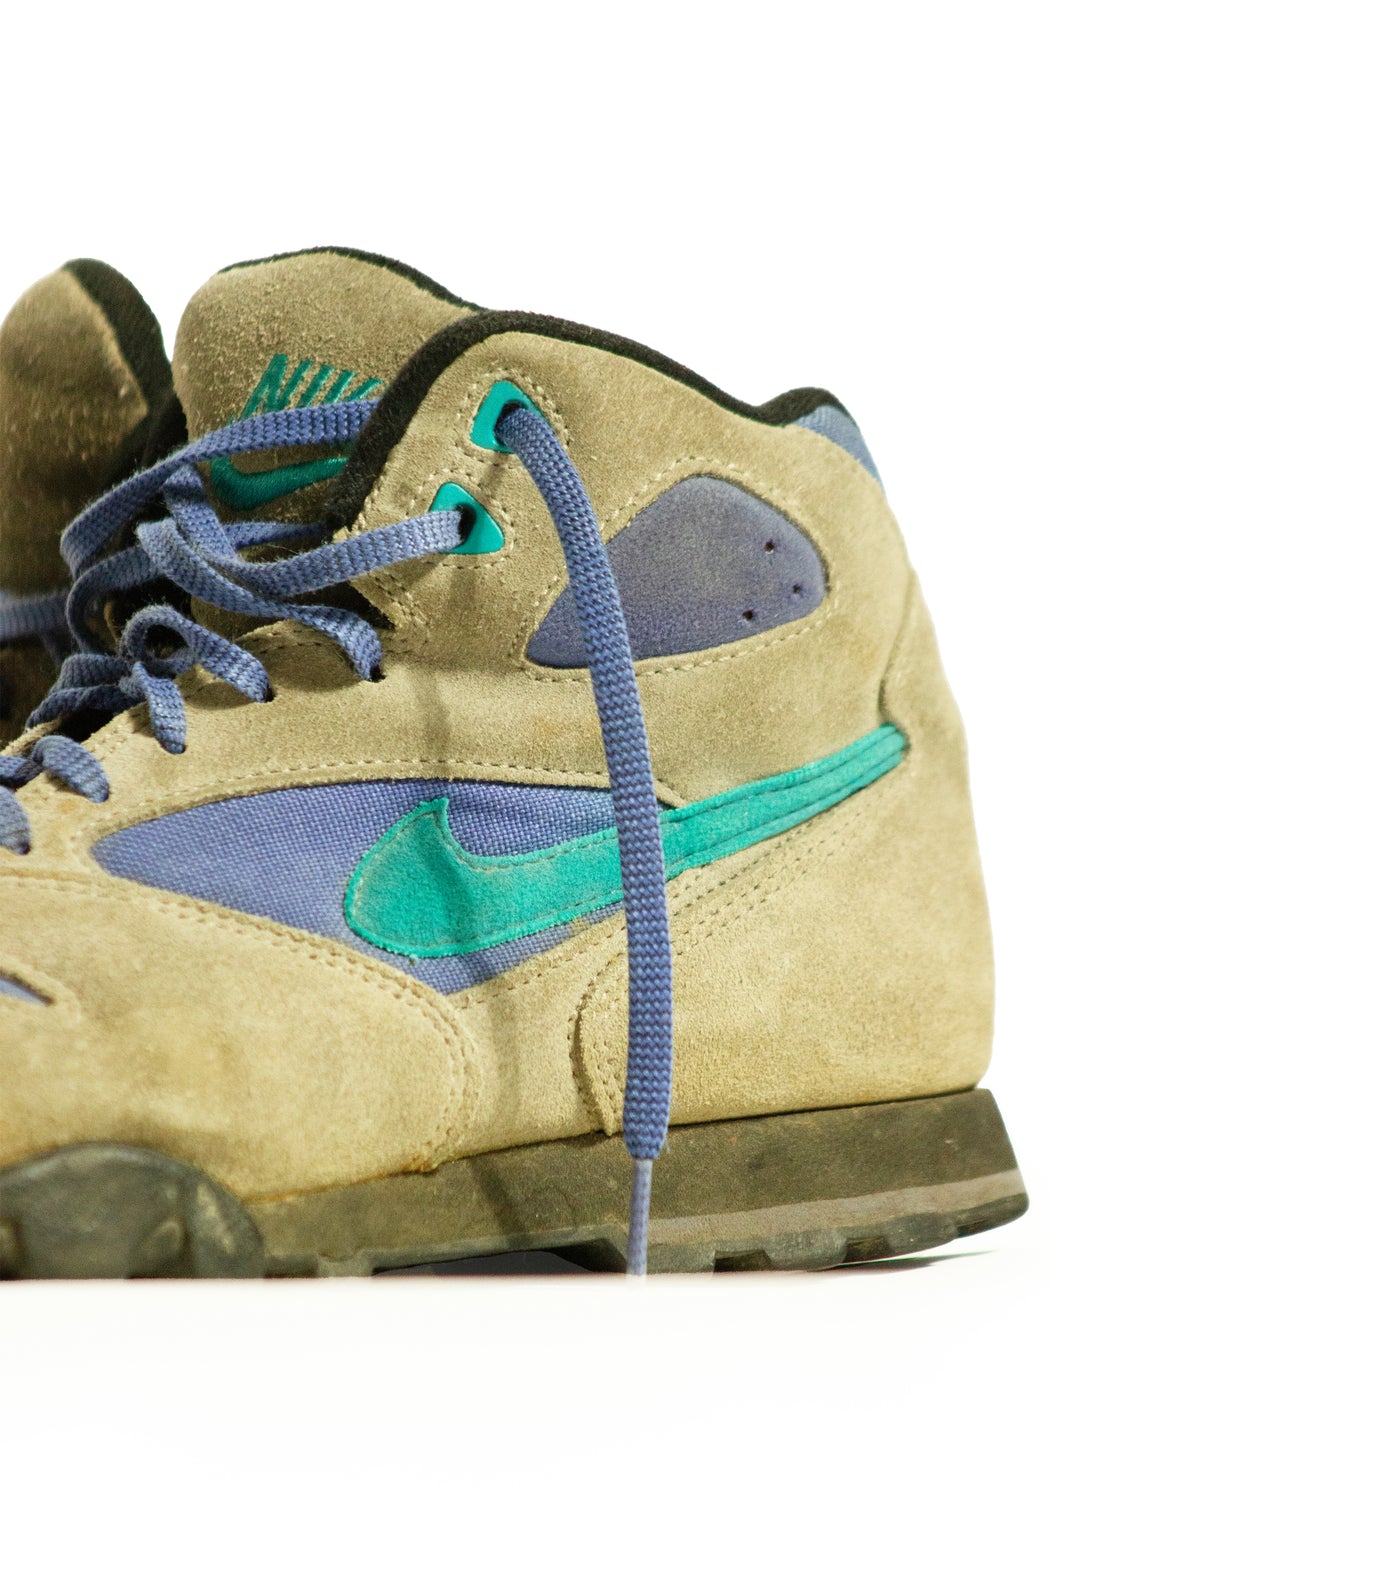 Vintage 90s Nike Air Boots